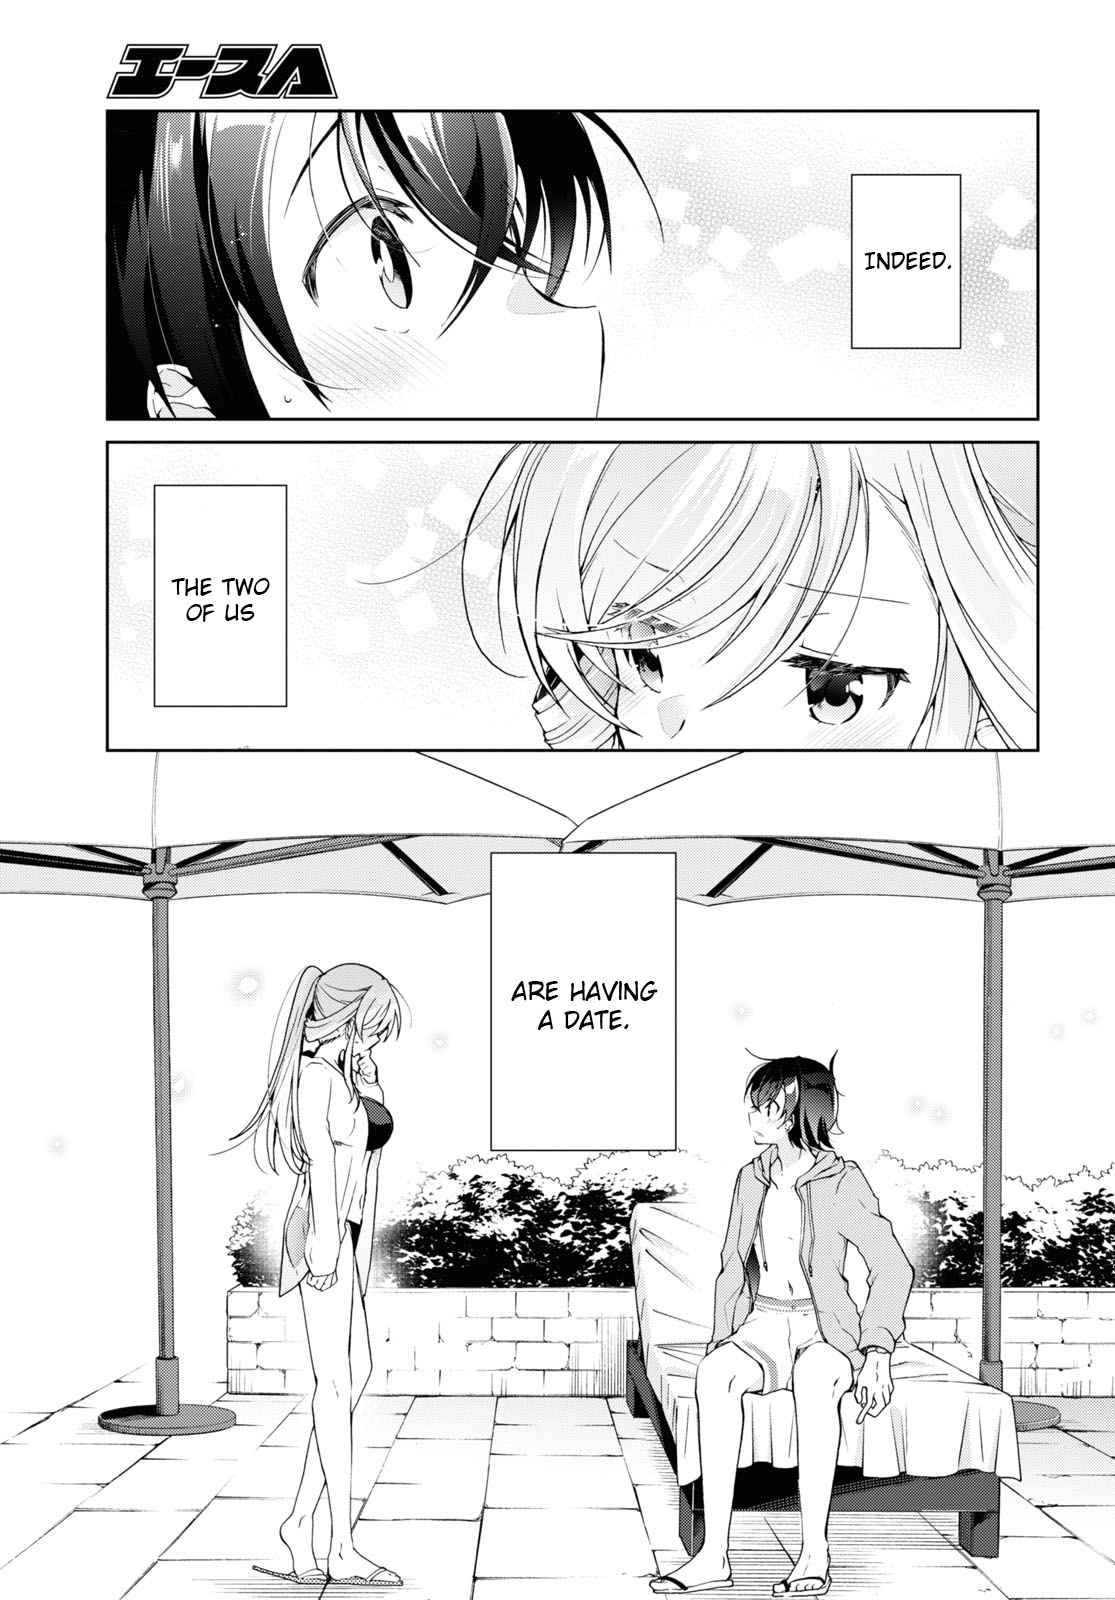 Isshiki-san Wants to Know About Love. - chapter 10 - #3